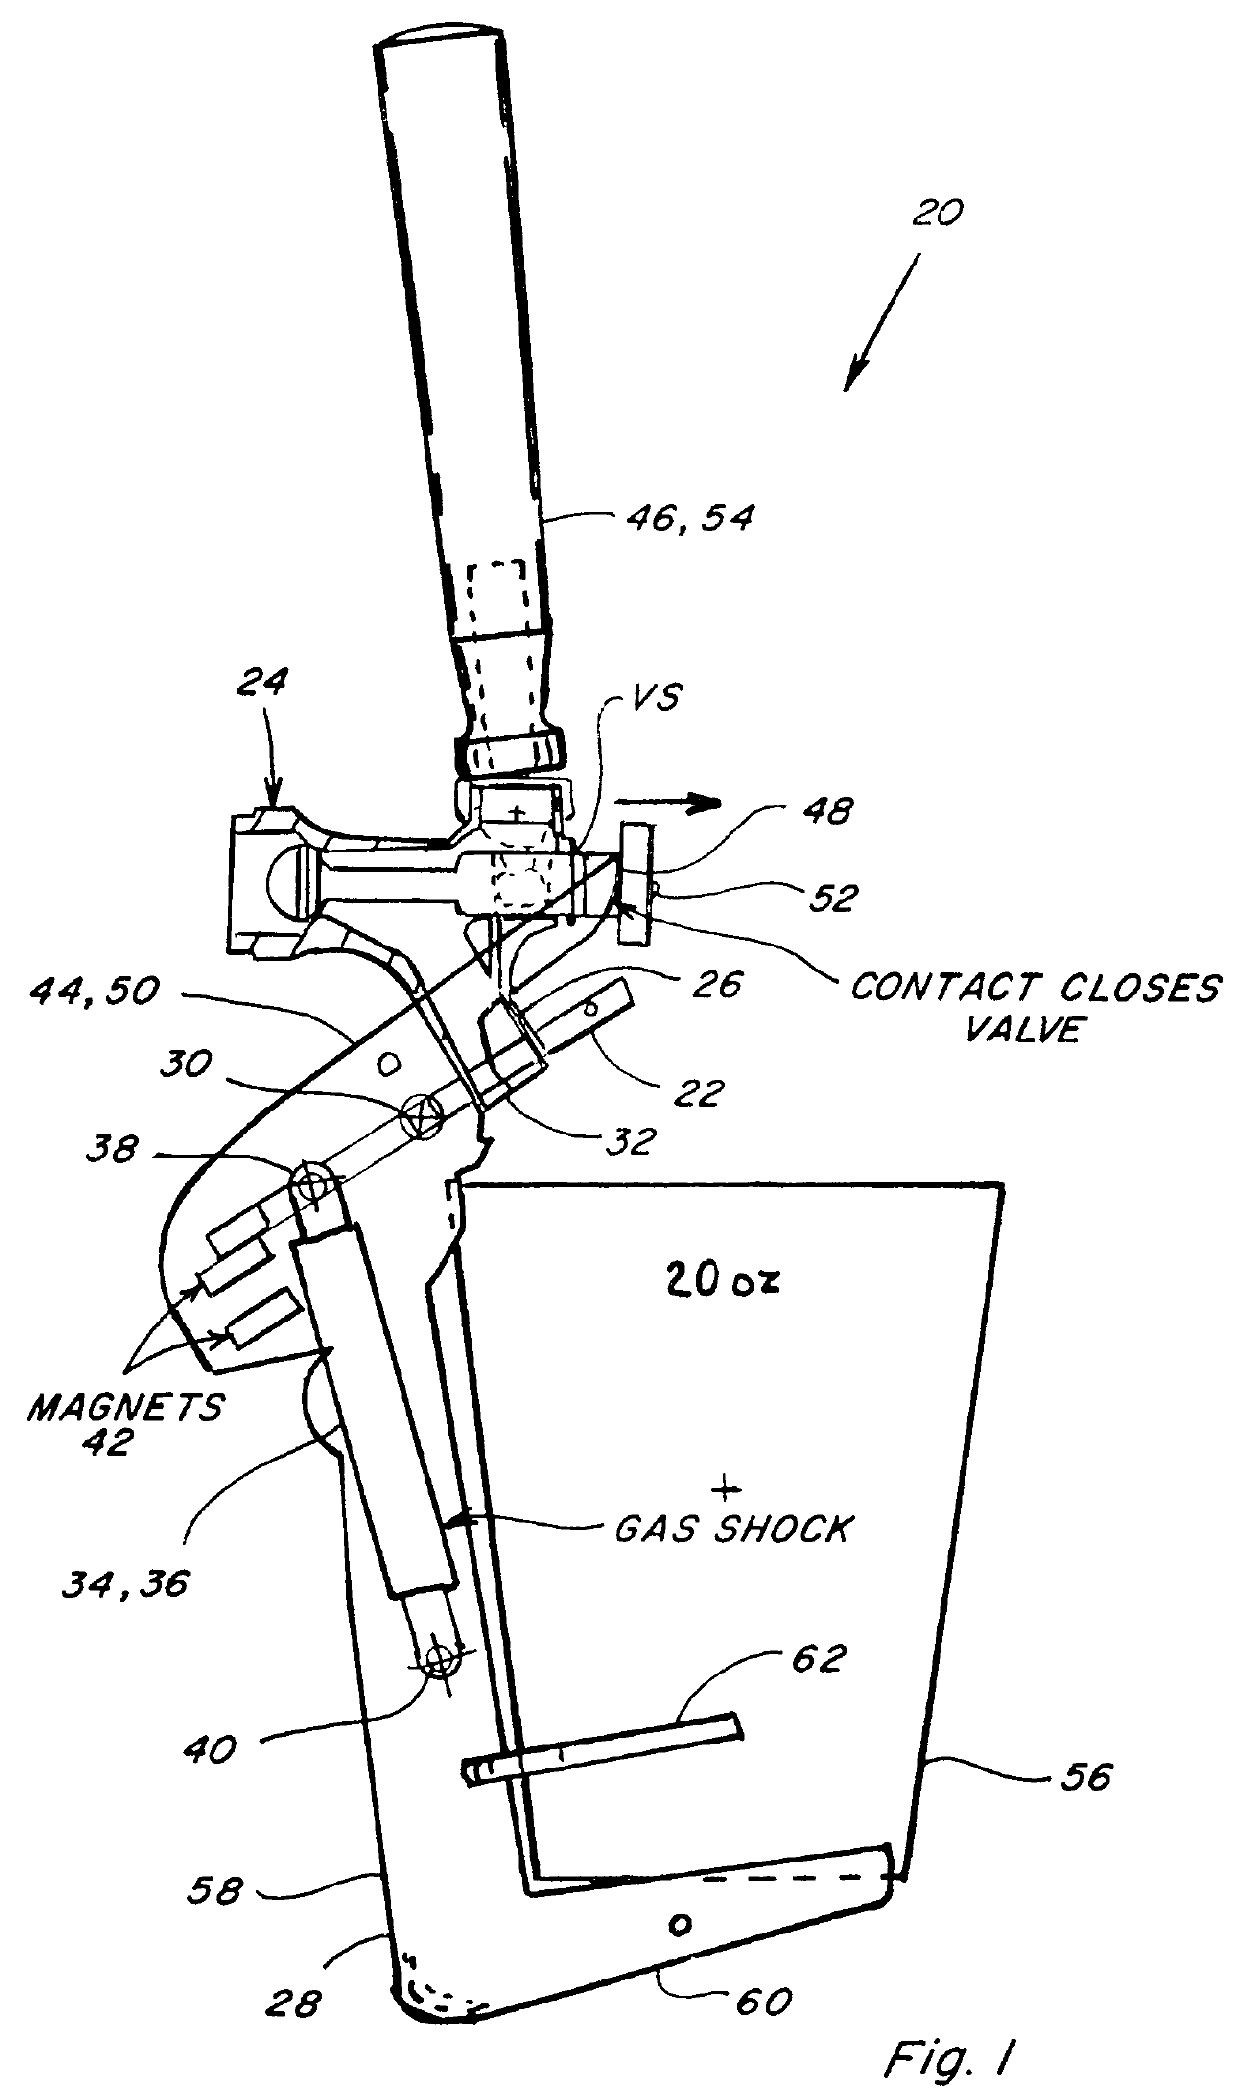 Tilter for holding a container in a progressively less tilted orientation while receiving a beverage from a dispensing system